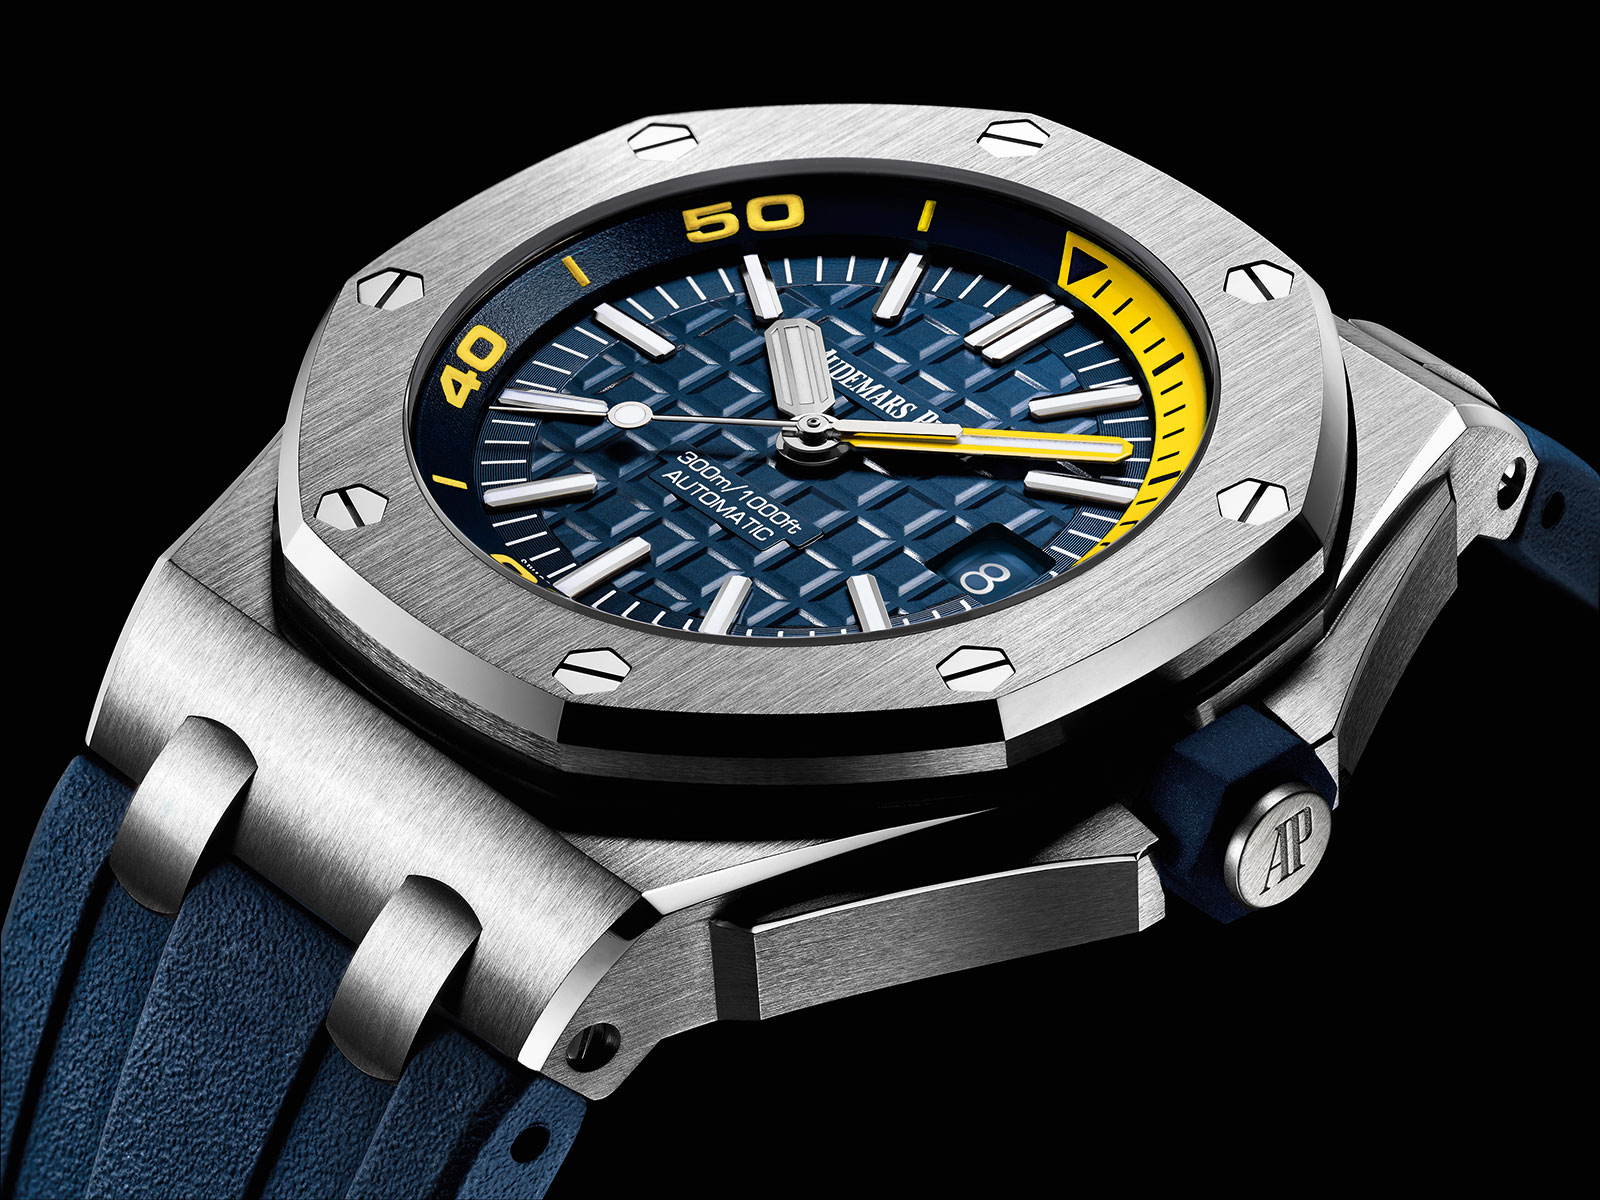 Royal Oak Offshore Diver Self-winding copy watches